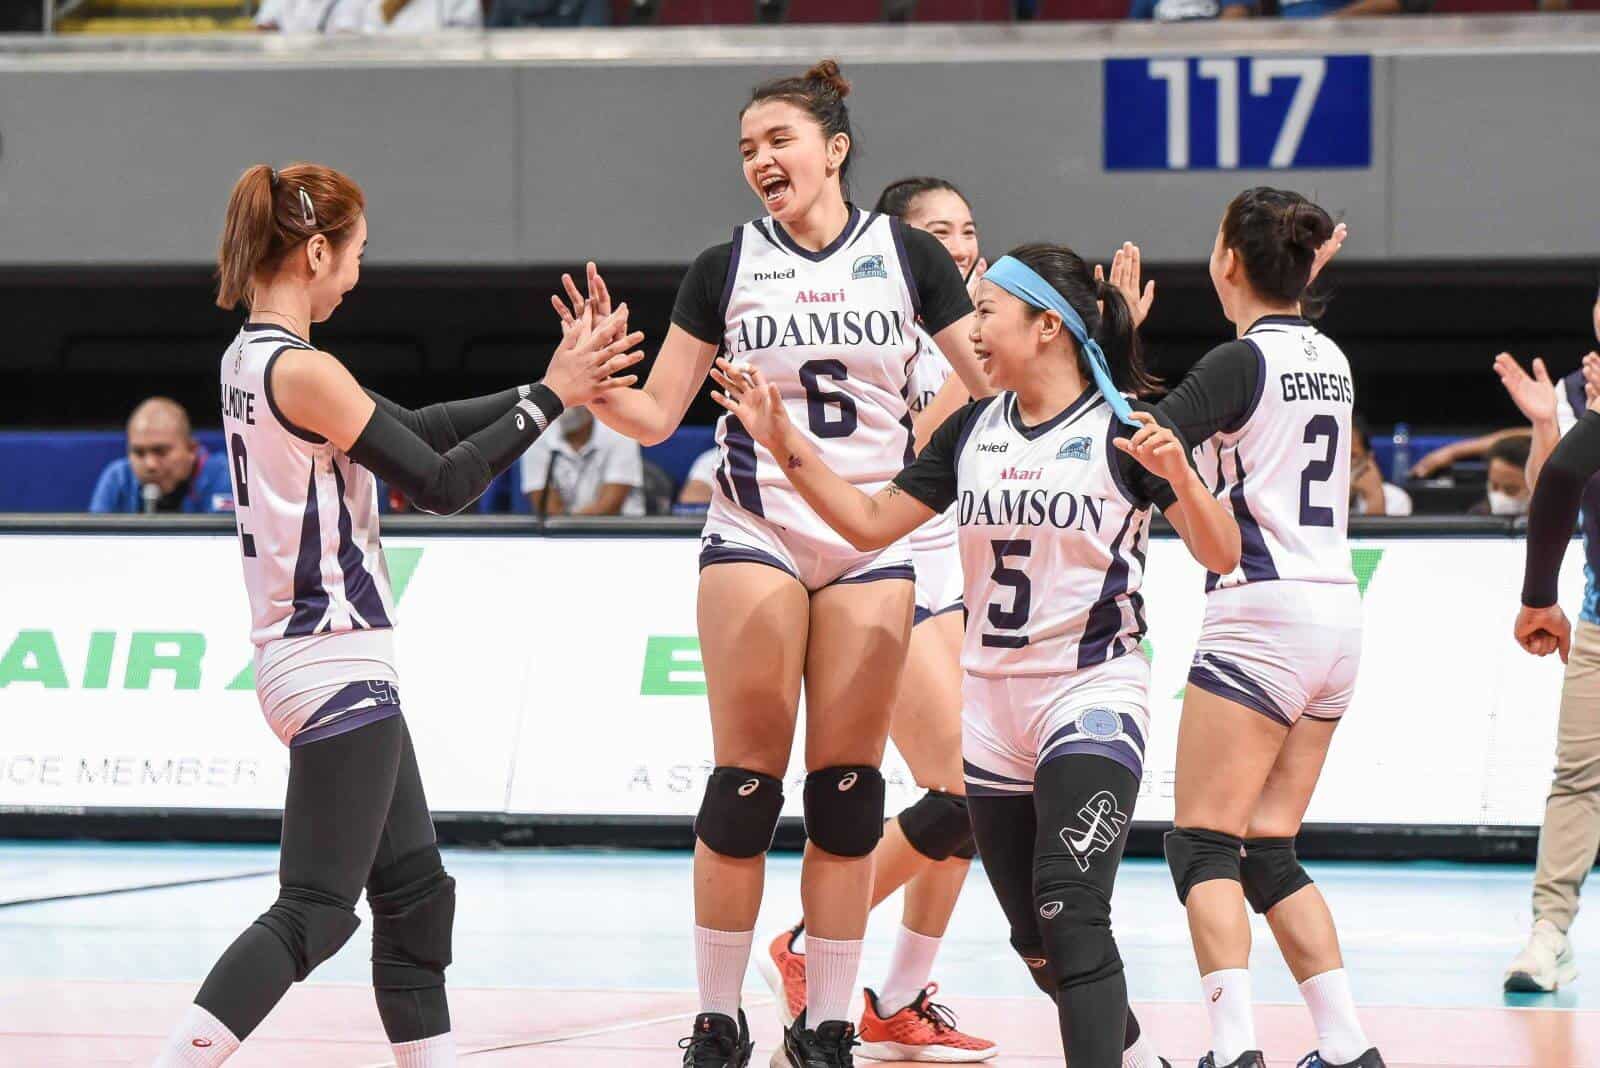 A group of female volleyball players celebrating their first win at the expense of Ateneo de Manila University.